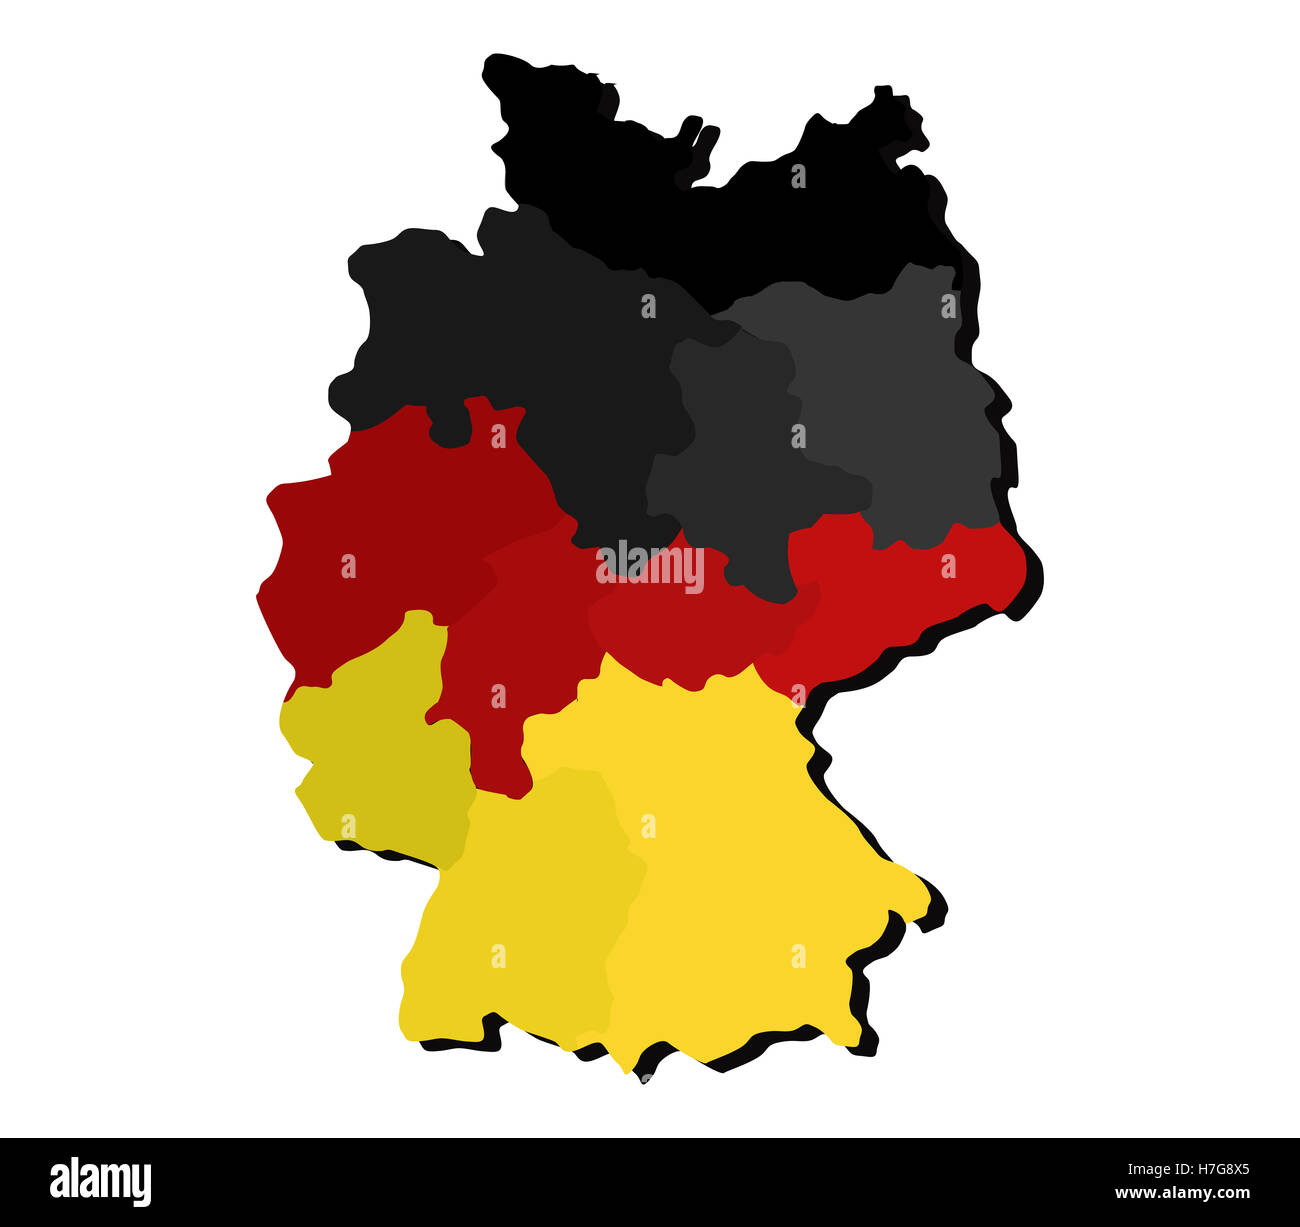 Germany map with regions and flag Stock Photo